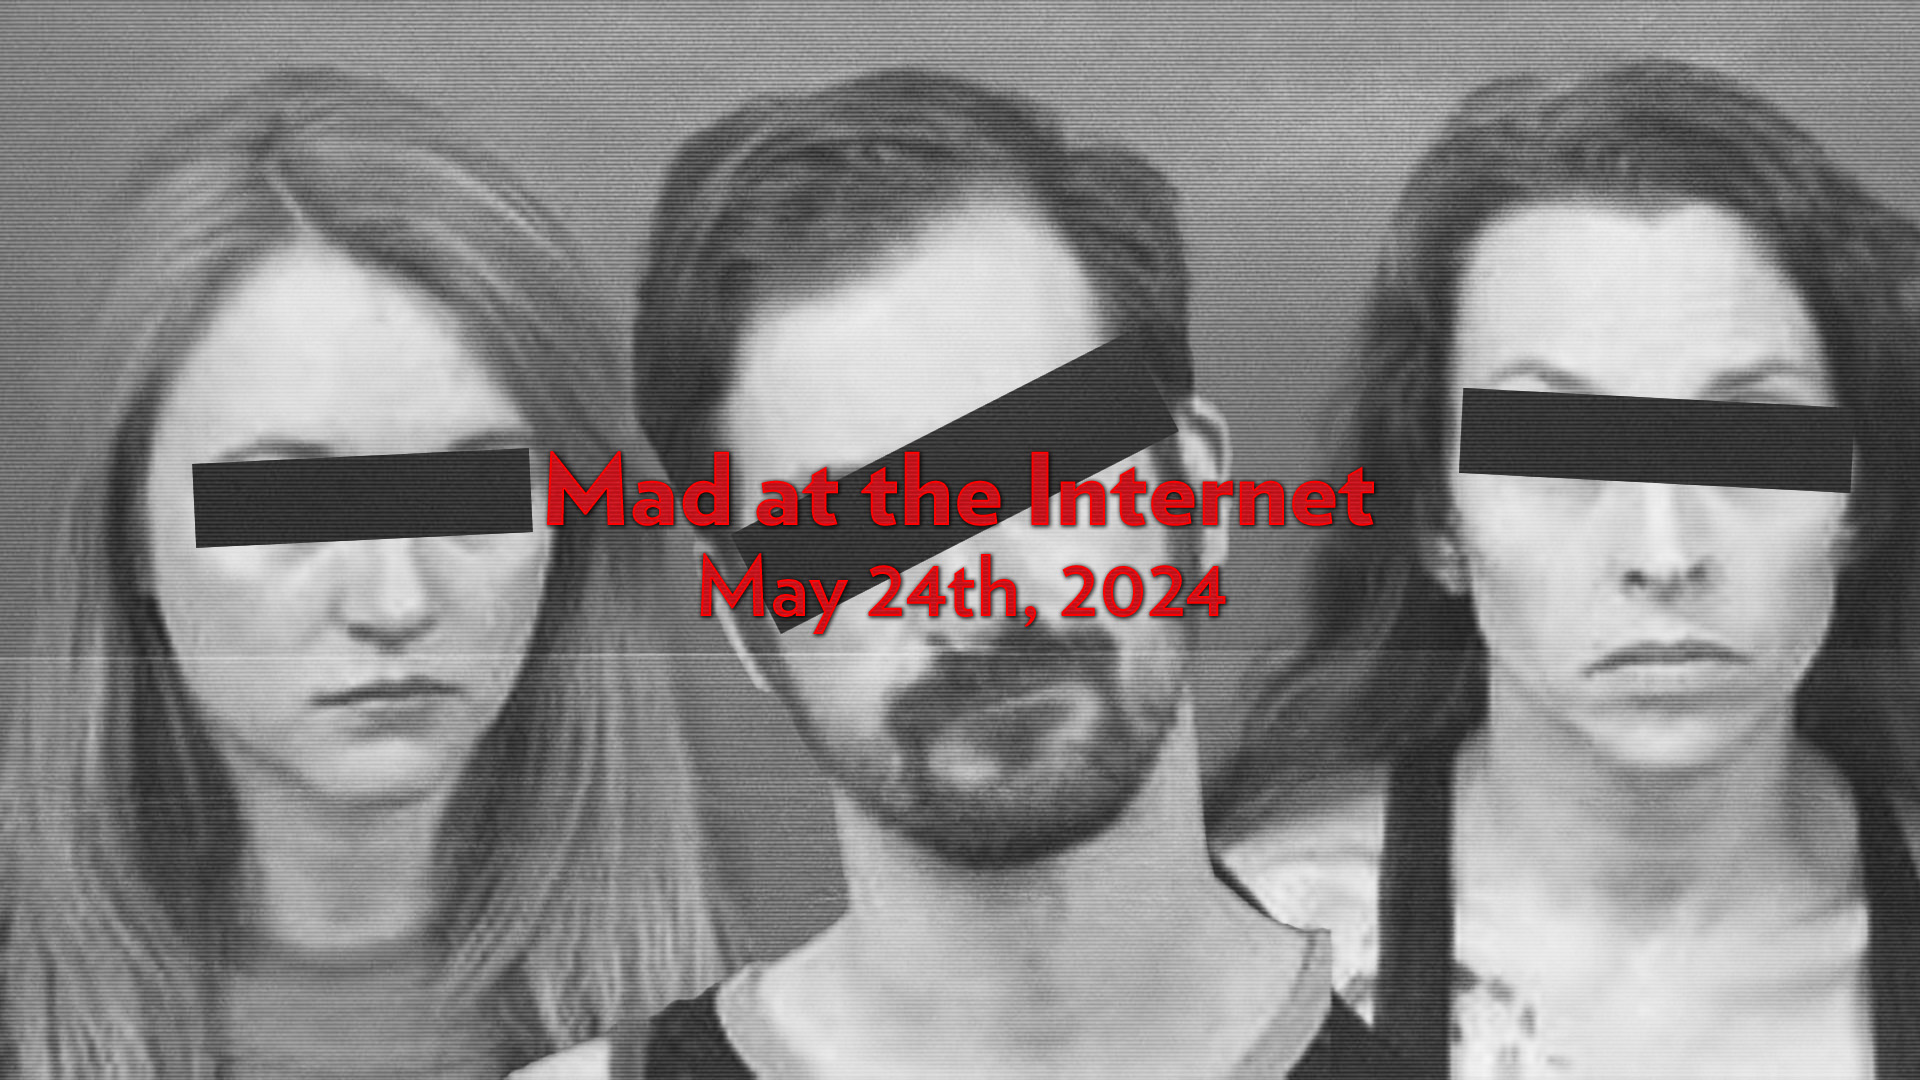 The Rekieta Arrest (May 24th, 2024) - Mad at the Internet